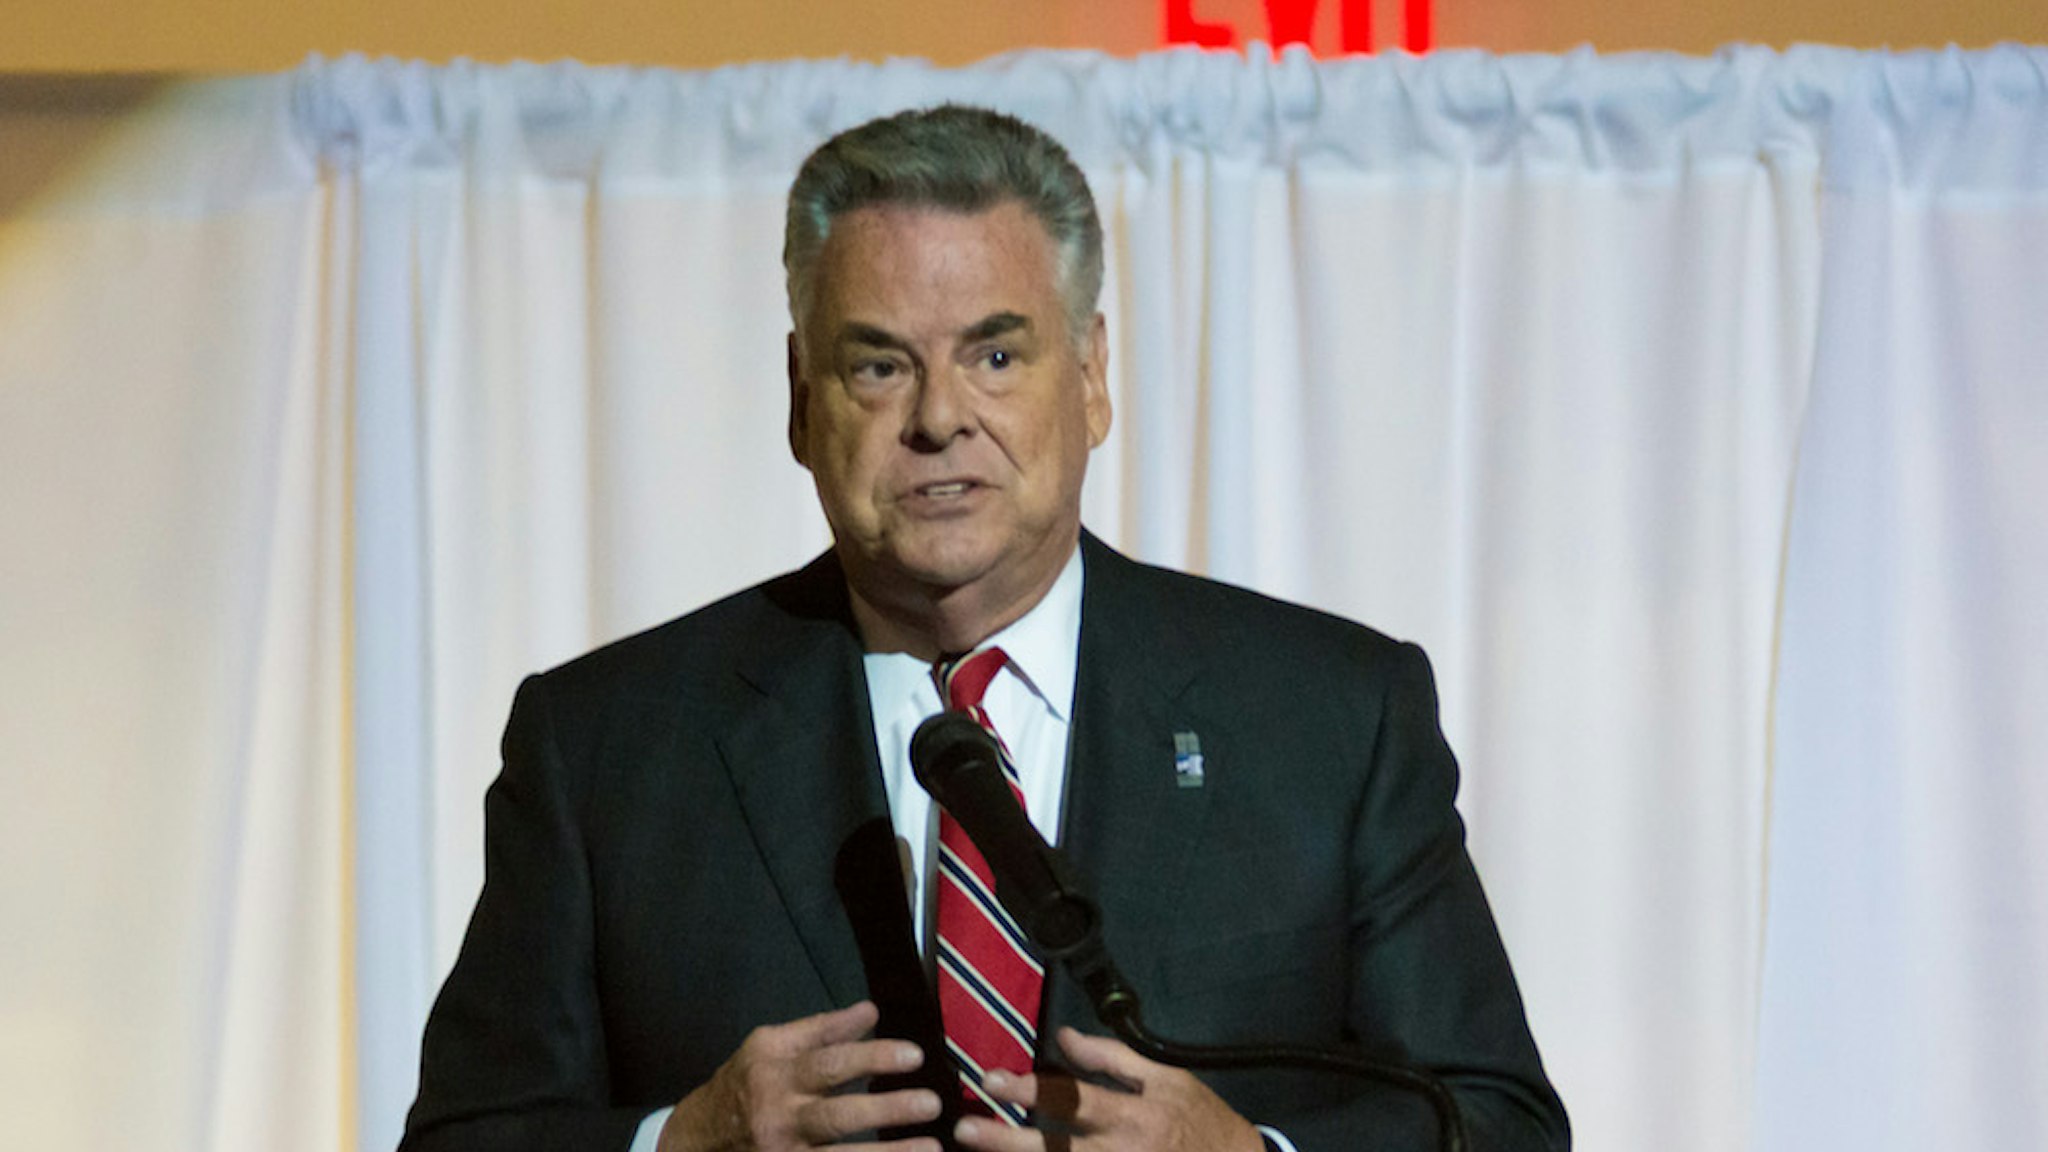 Congressman Peter King attends the 2016 Firefighters Humanitarian Awards at the Nassau County Firefighters Museum on October 14, 2016 in Garden City, New York. (Photo by Steven A Henry/Getty Images)